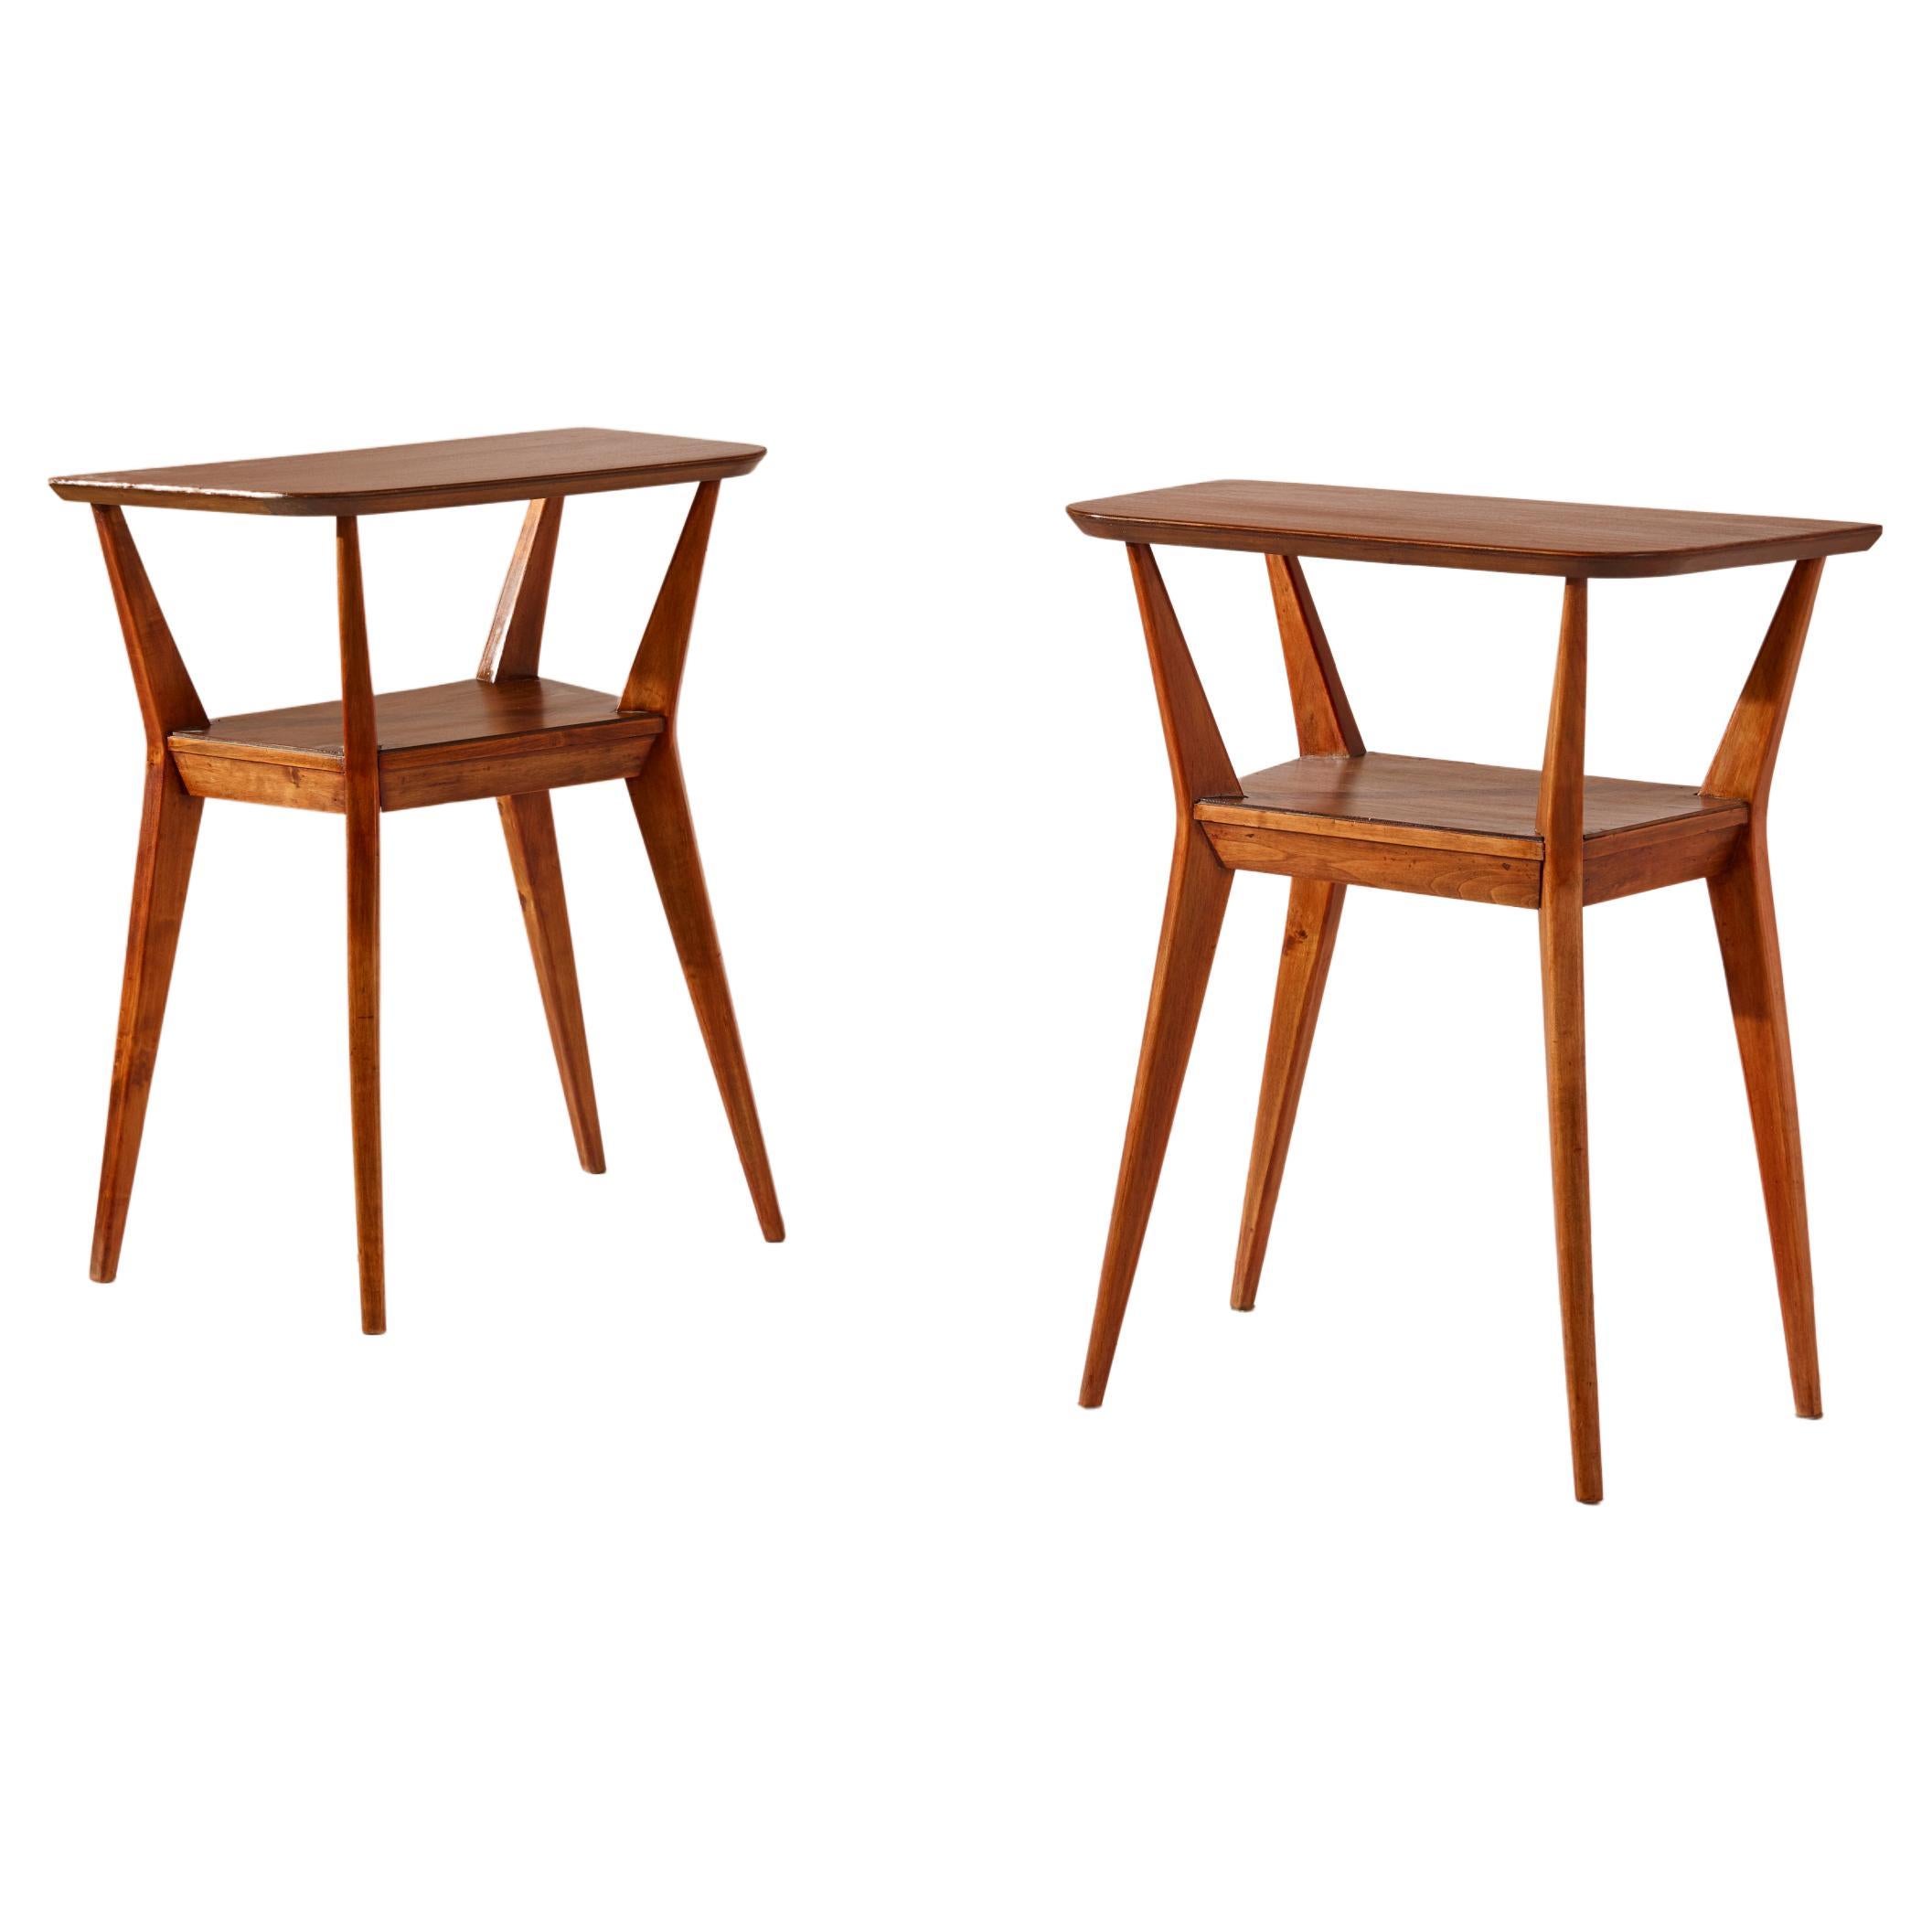 Two Beechwood Side Tables in the Manner of Gio Ponti, Italy, 1950s For Sale